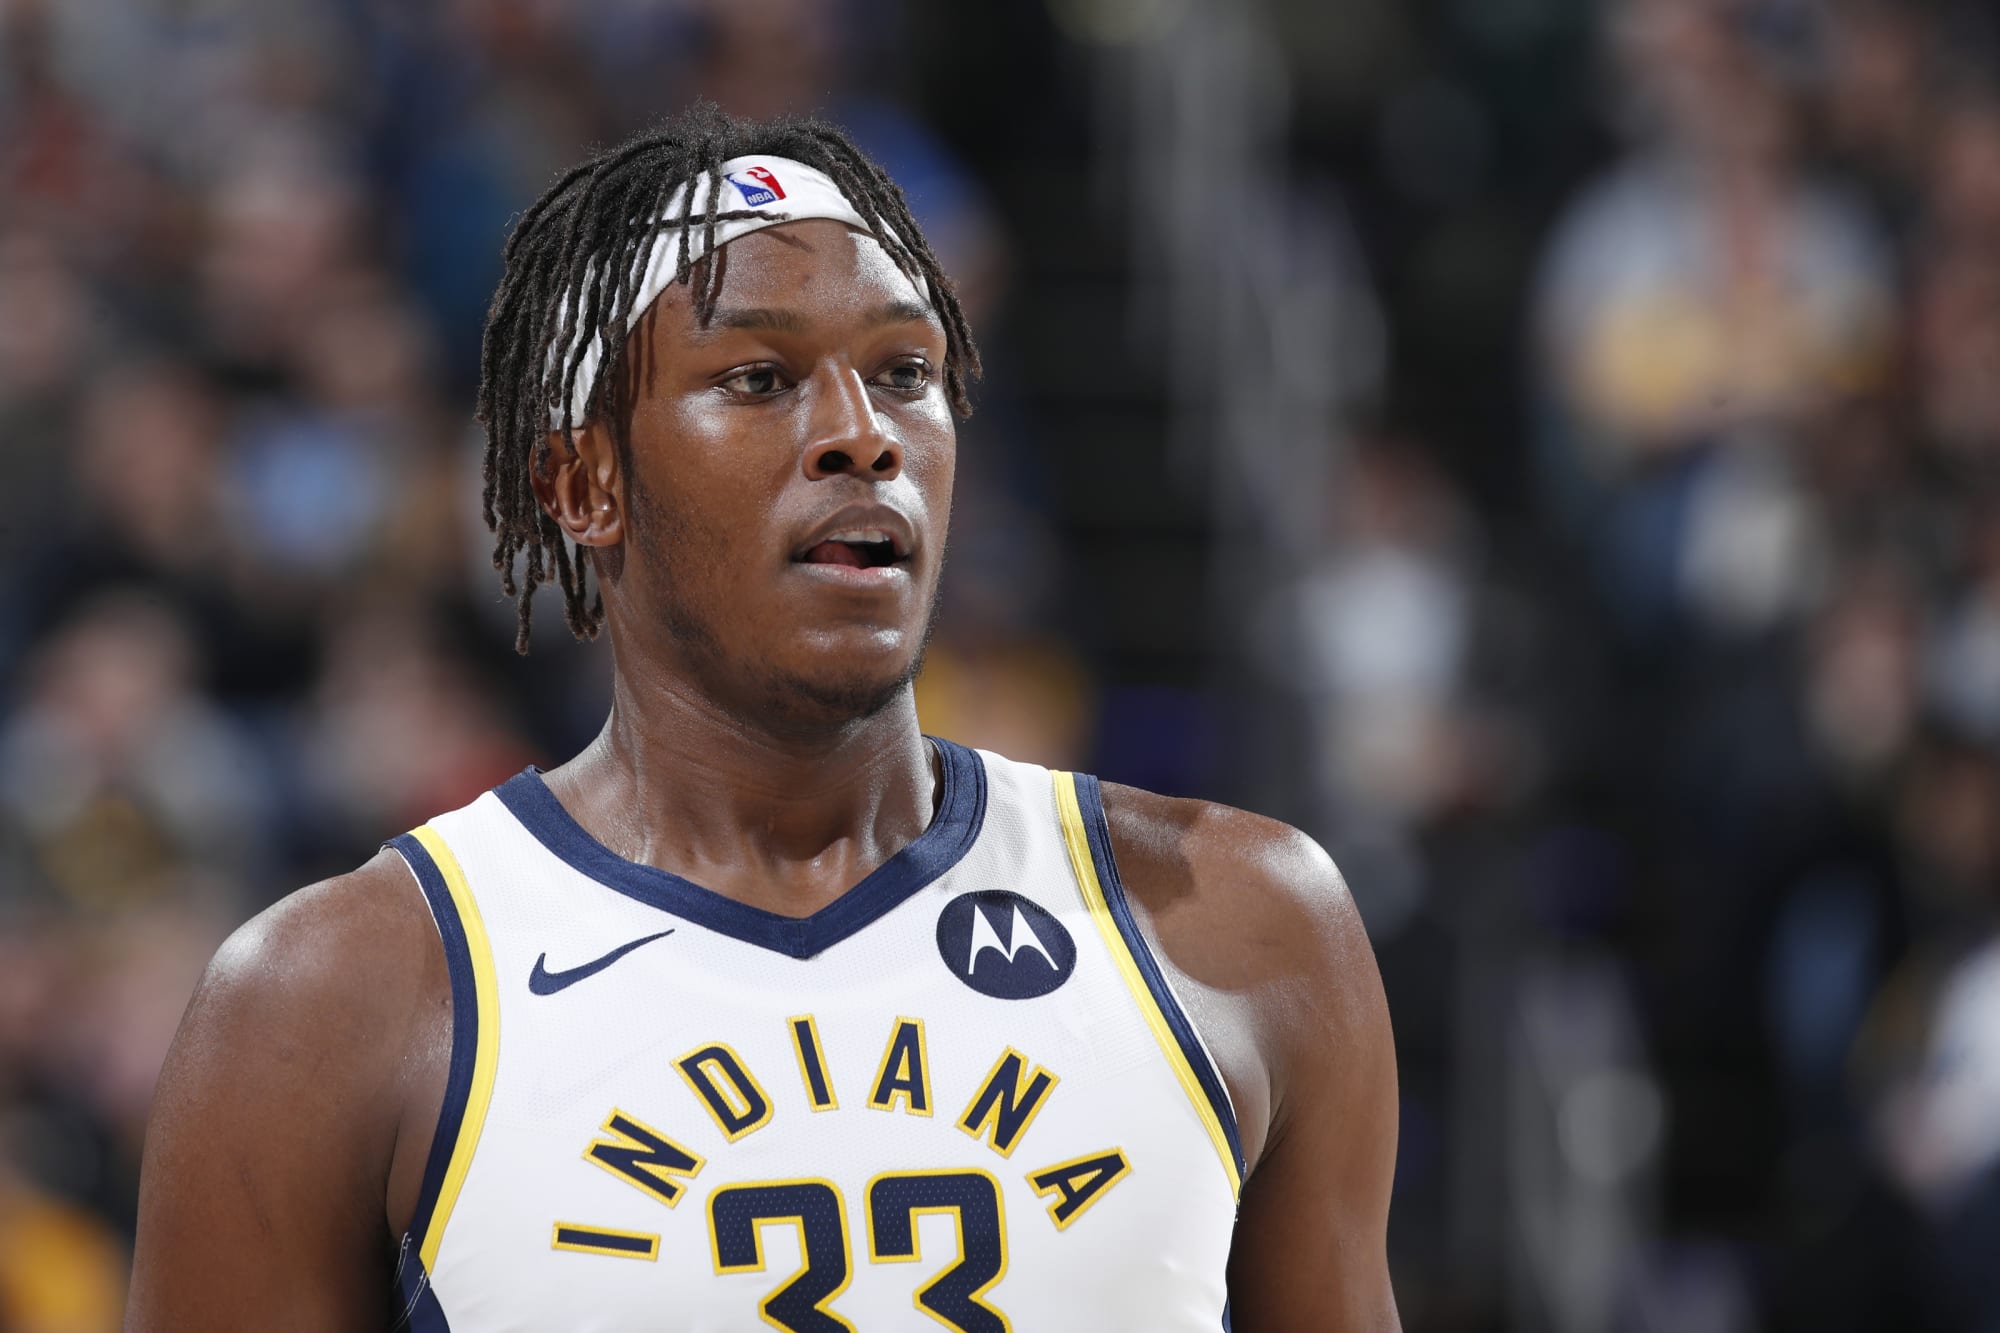 NBA Star Myles Turner Embraces Authenticity as He Opens Up About His